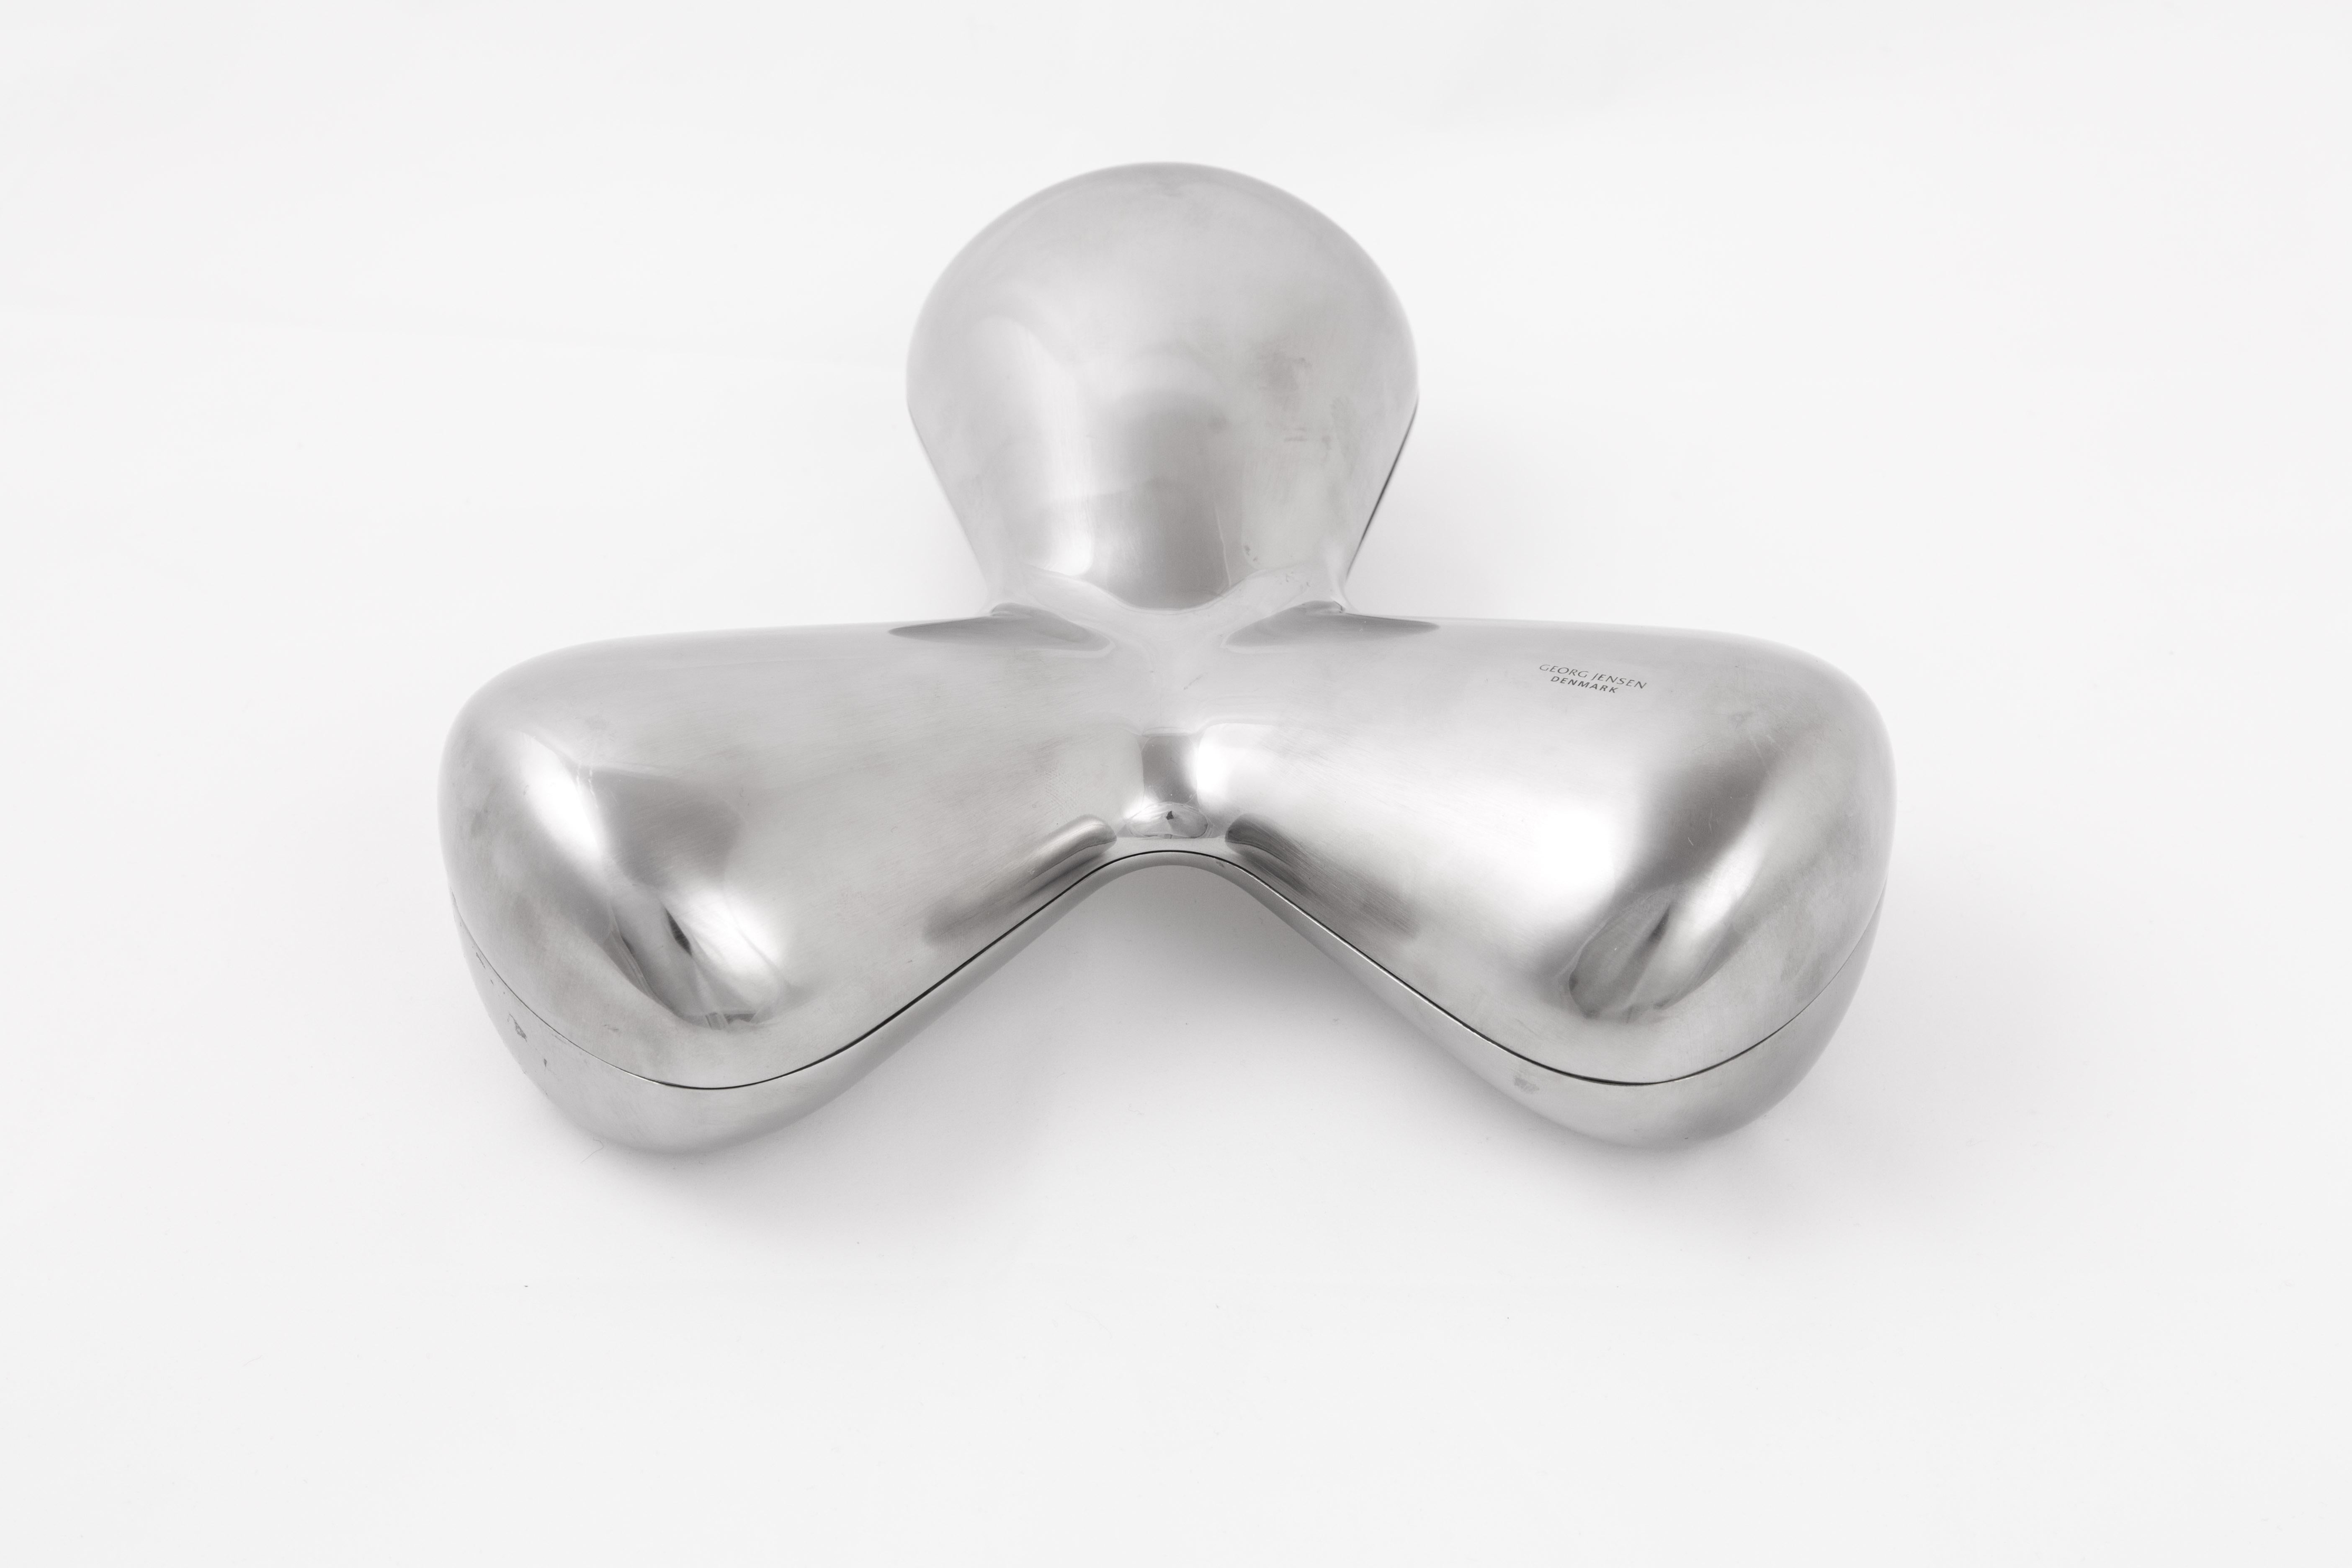 Karim Rashid. The spin box speaks the pure and organic design of Georg Jensen. None other than star designer Karim Rashid designed the stylish storage box with cryptic symbolism. The spin box is made of stainless steel, with a removable white